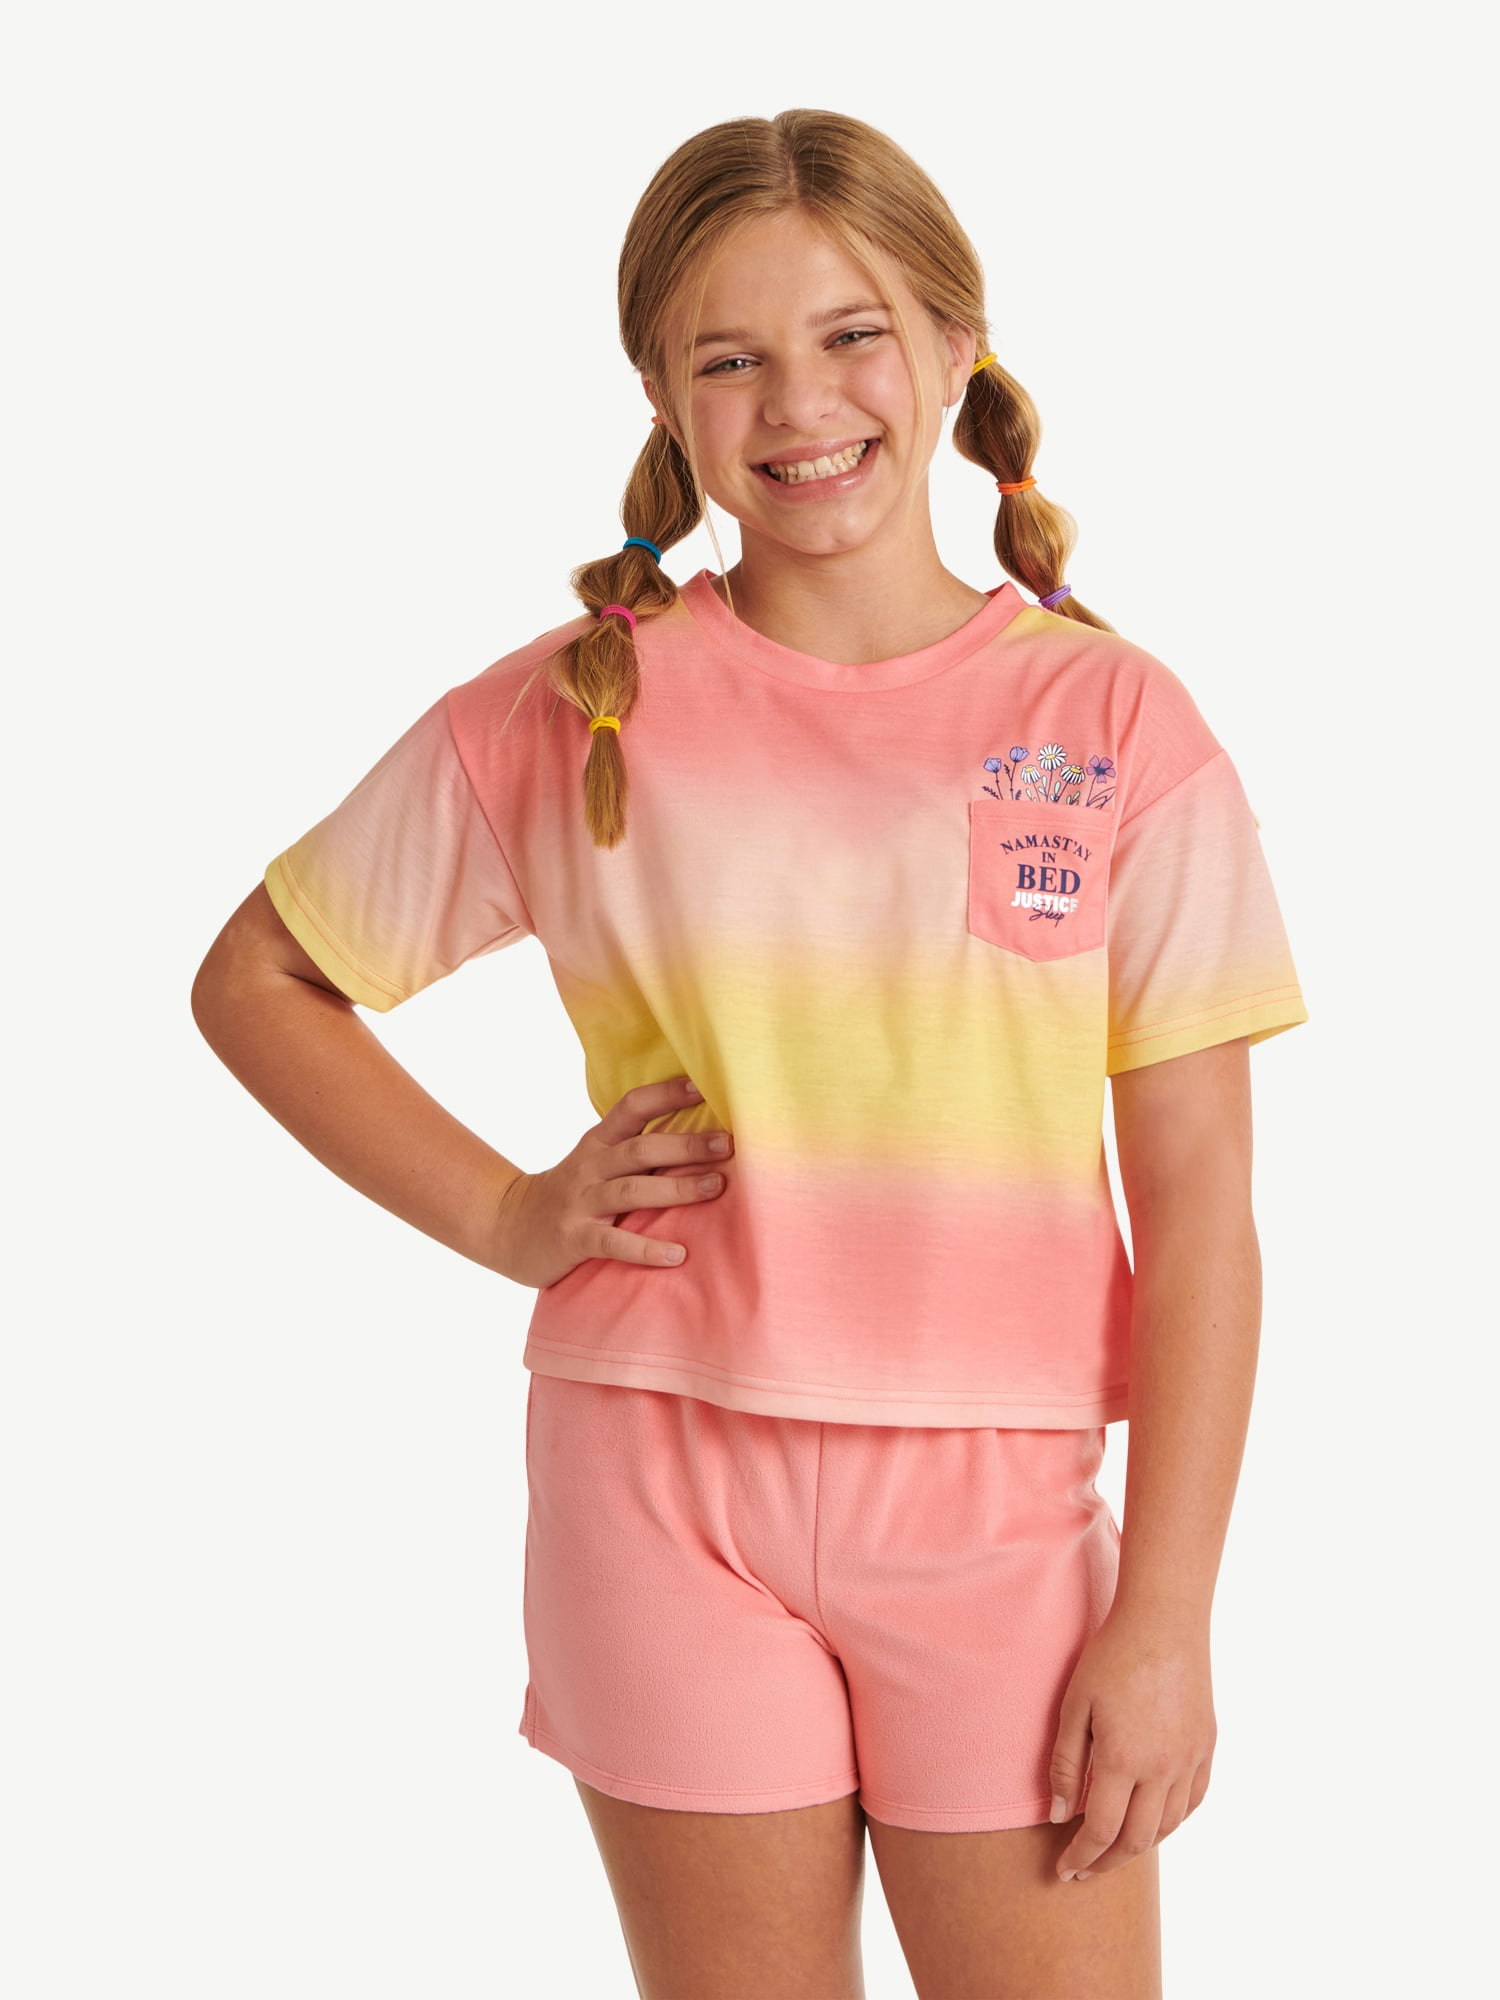 Justice Short Sleeve and Shorts, 2-Piece Pajama Set, Sizes 5-18 and Plus